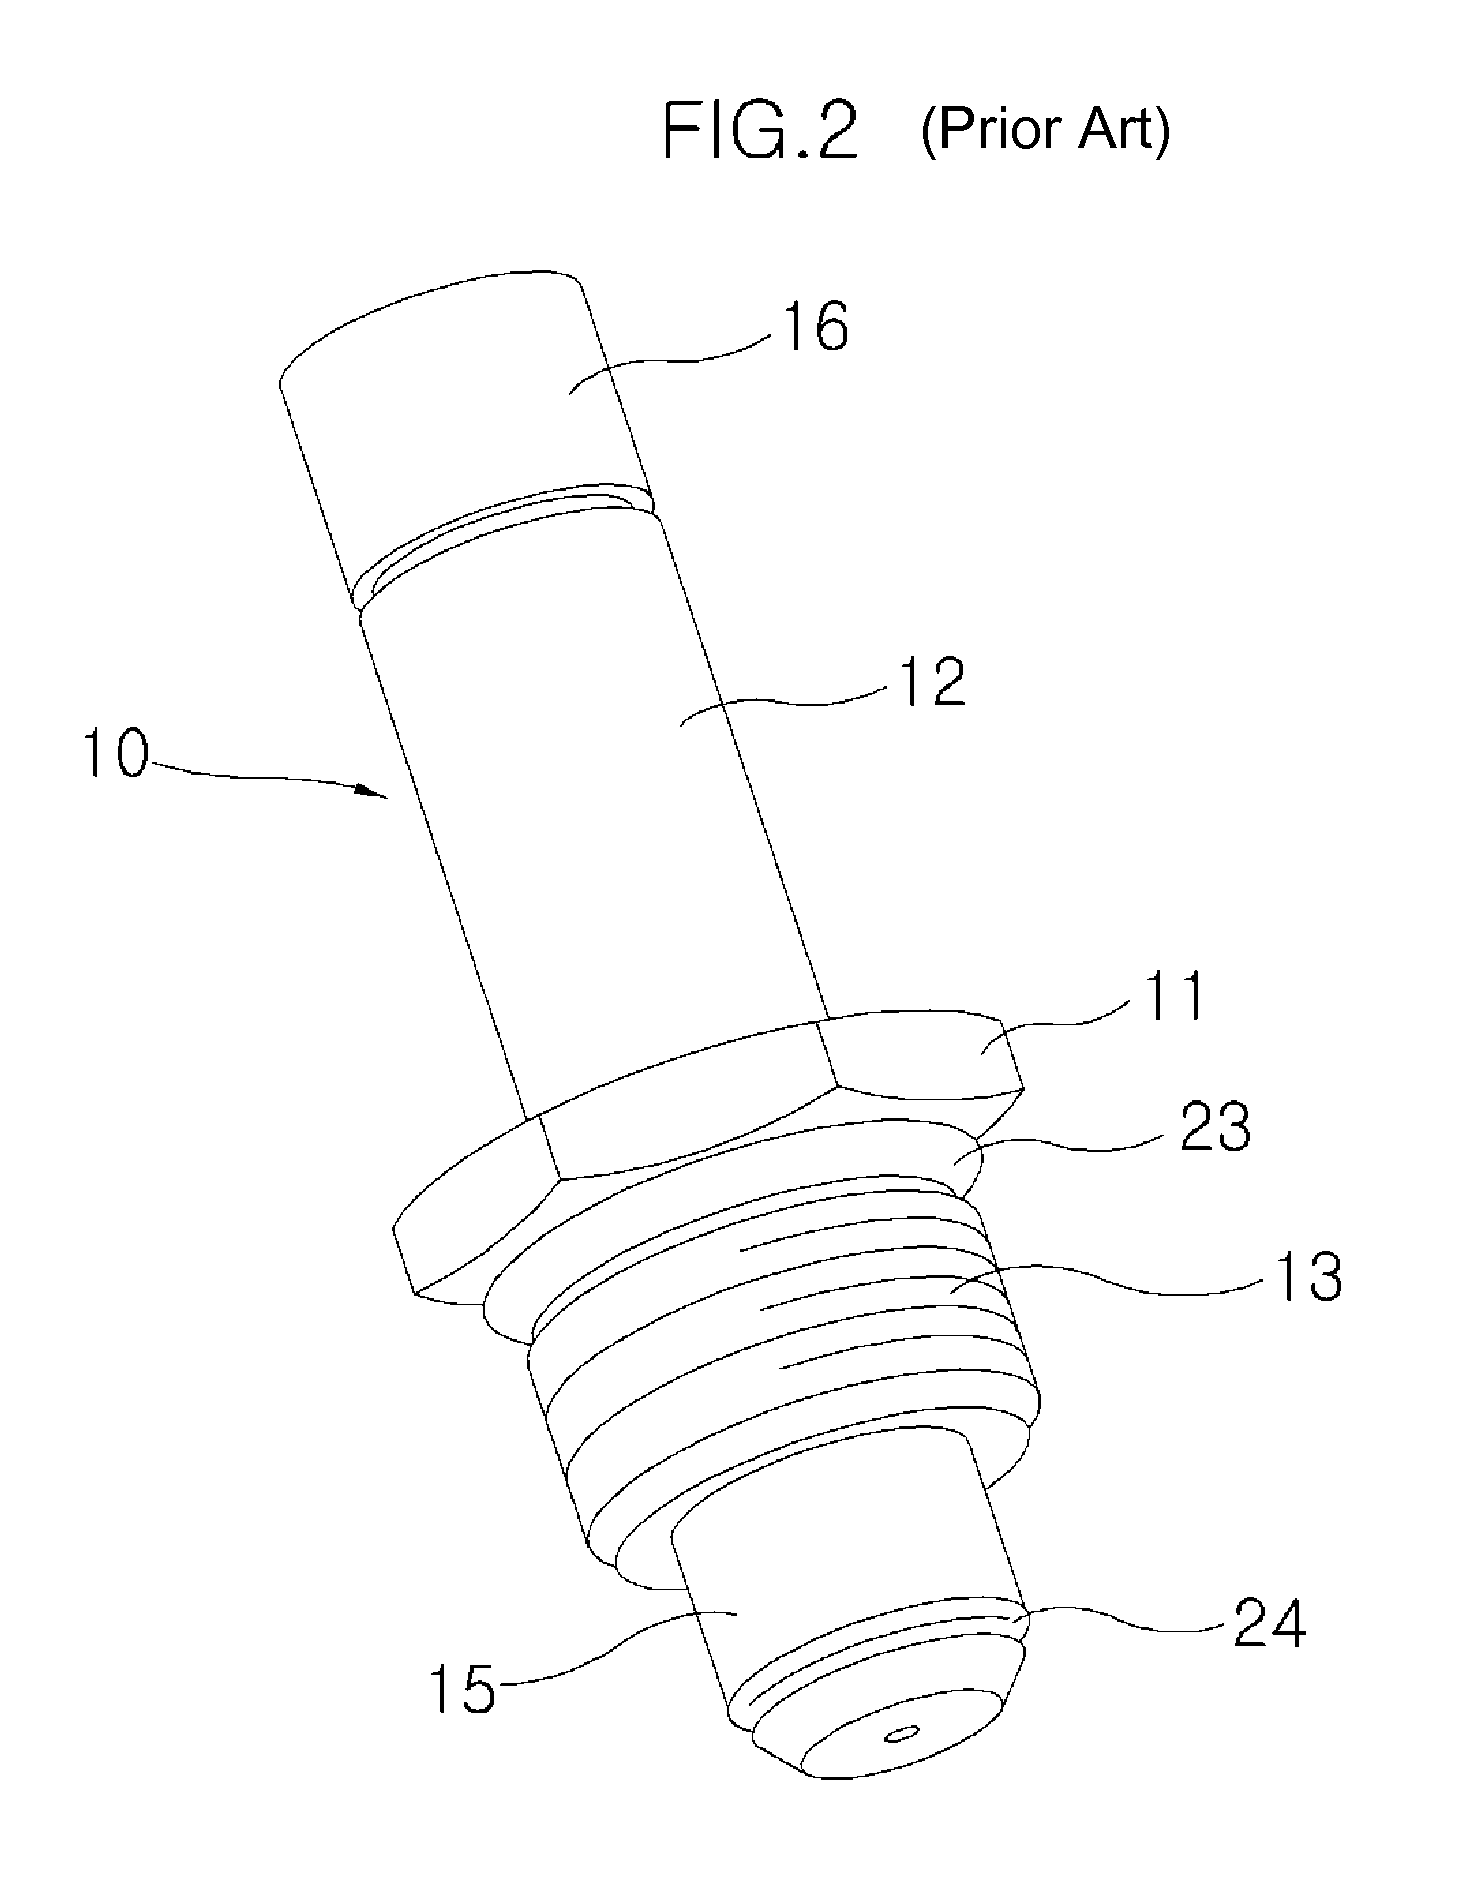 Solenoid valve for liquid propane injection system